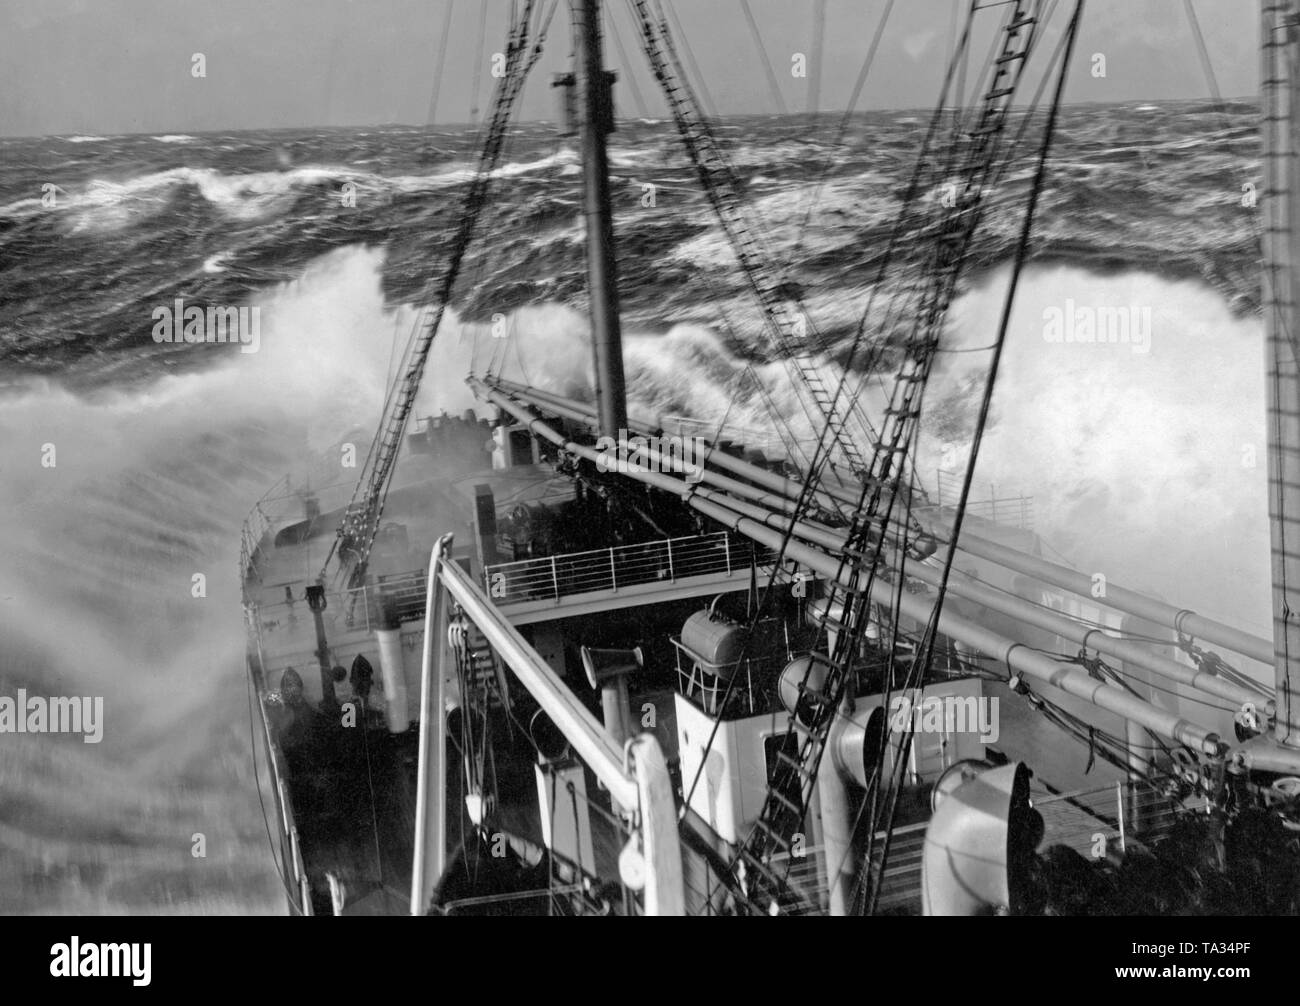 Bow of a ship in heavy seas at wind force 10. Stock Photo